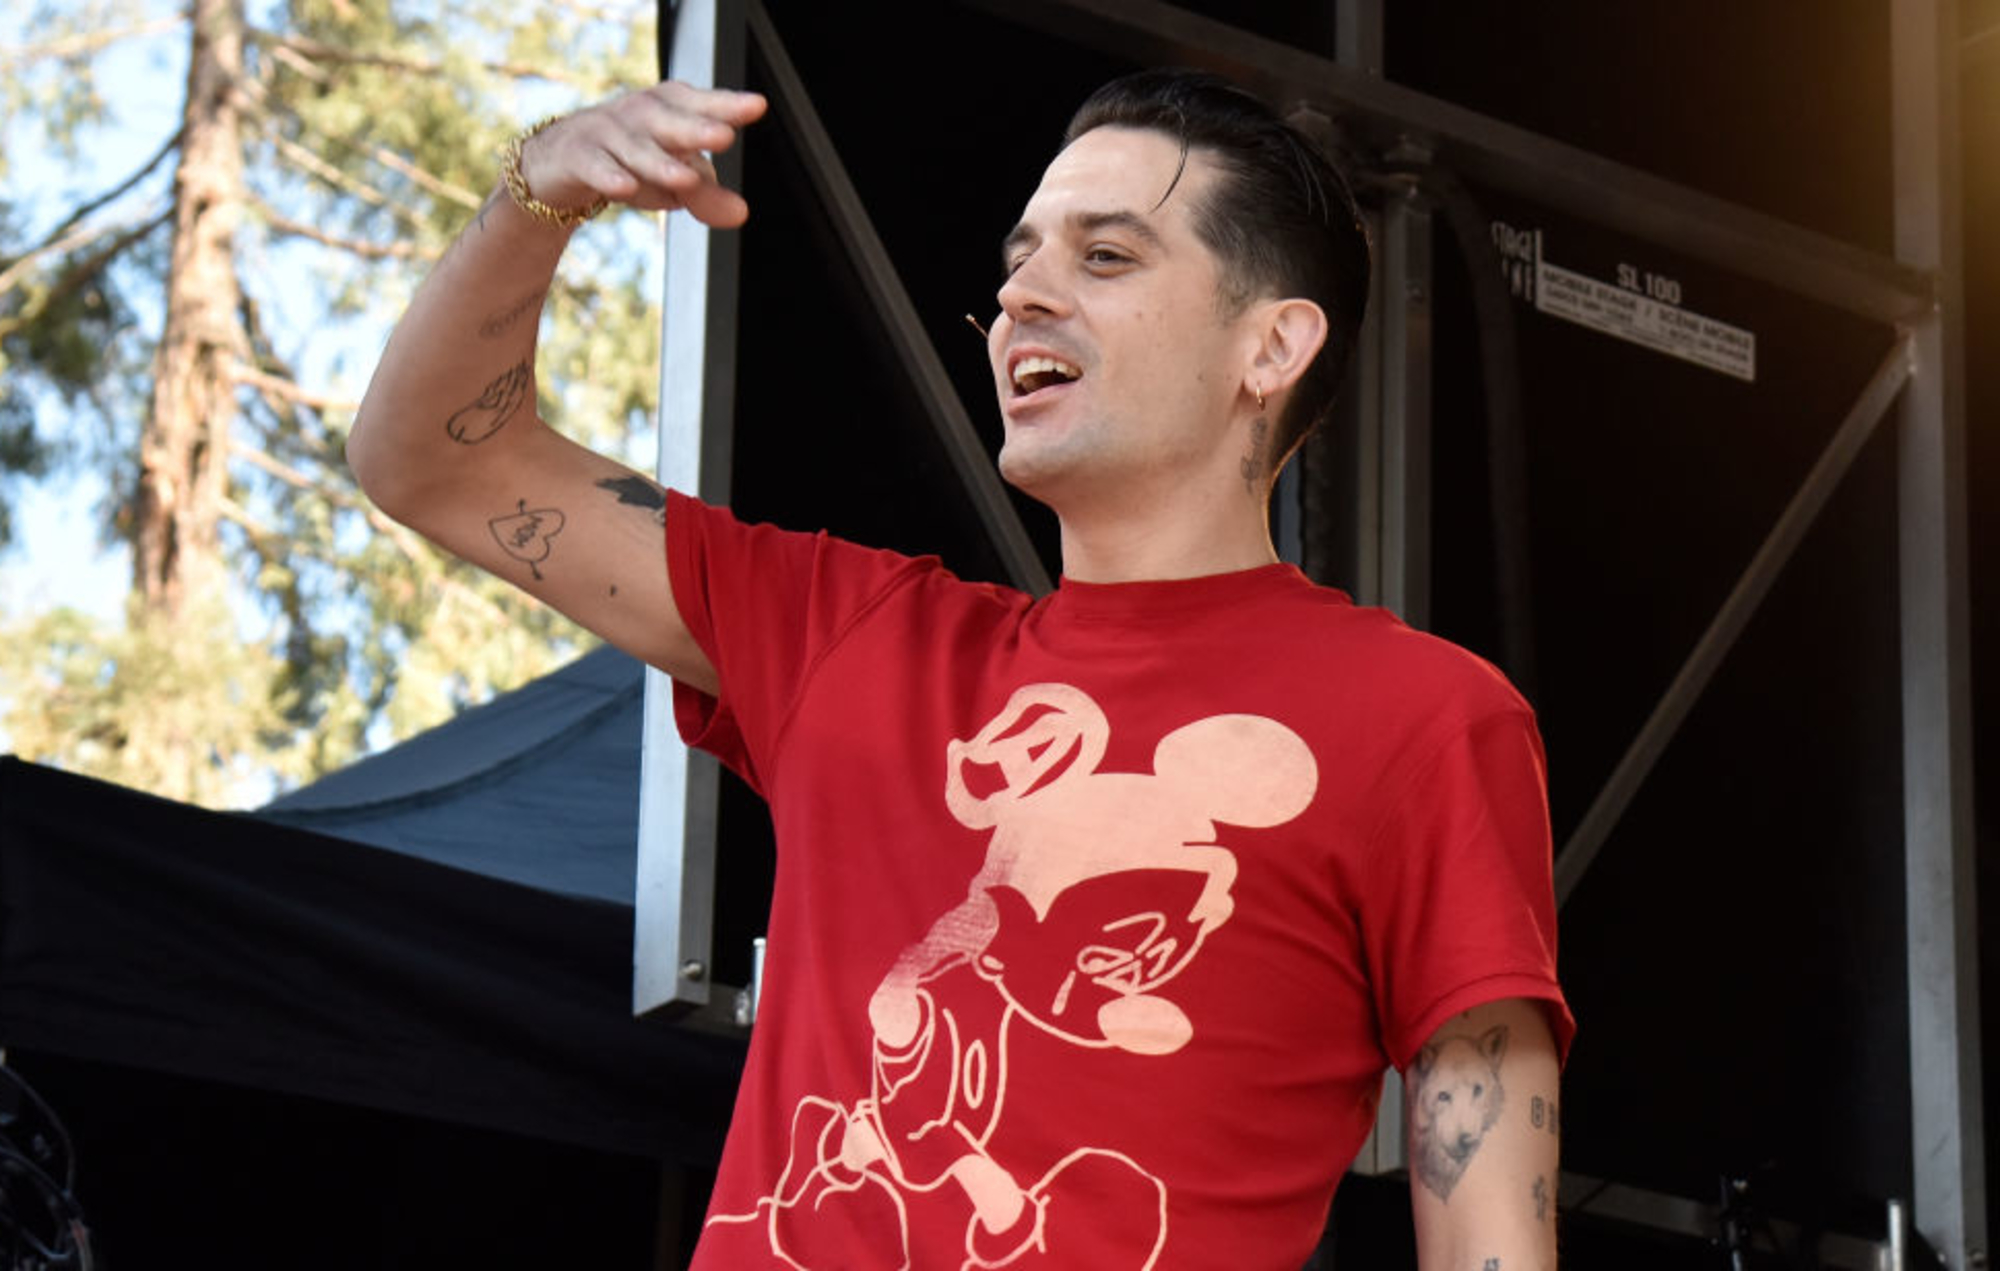 G-Eazy announces ‘These Things Happen Too’, shares new track ‘The Announcement’